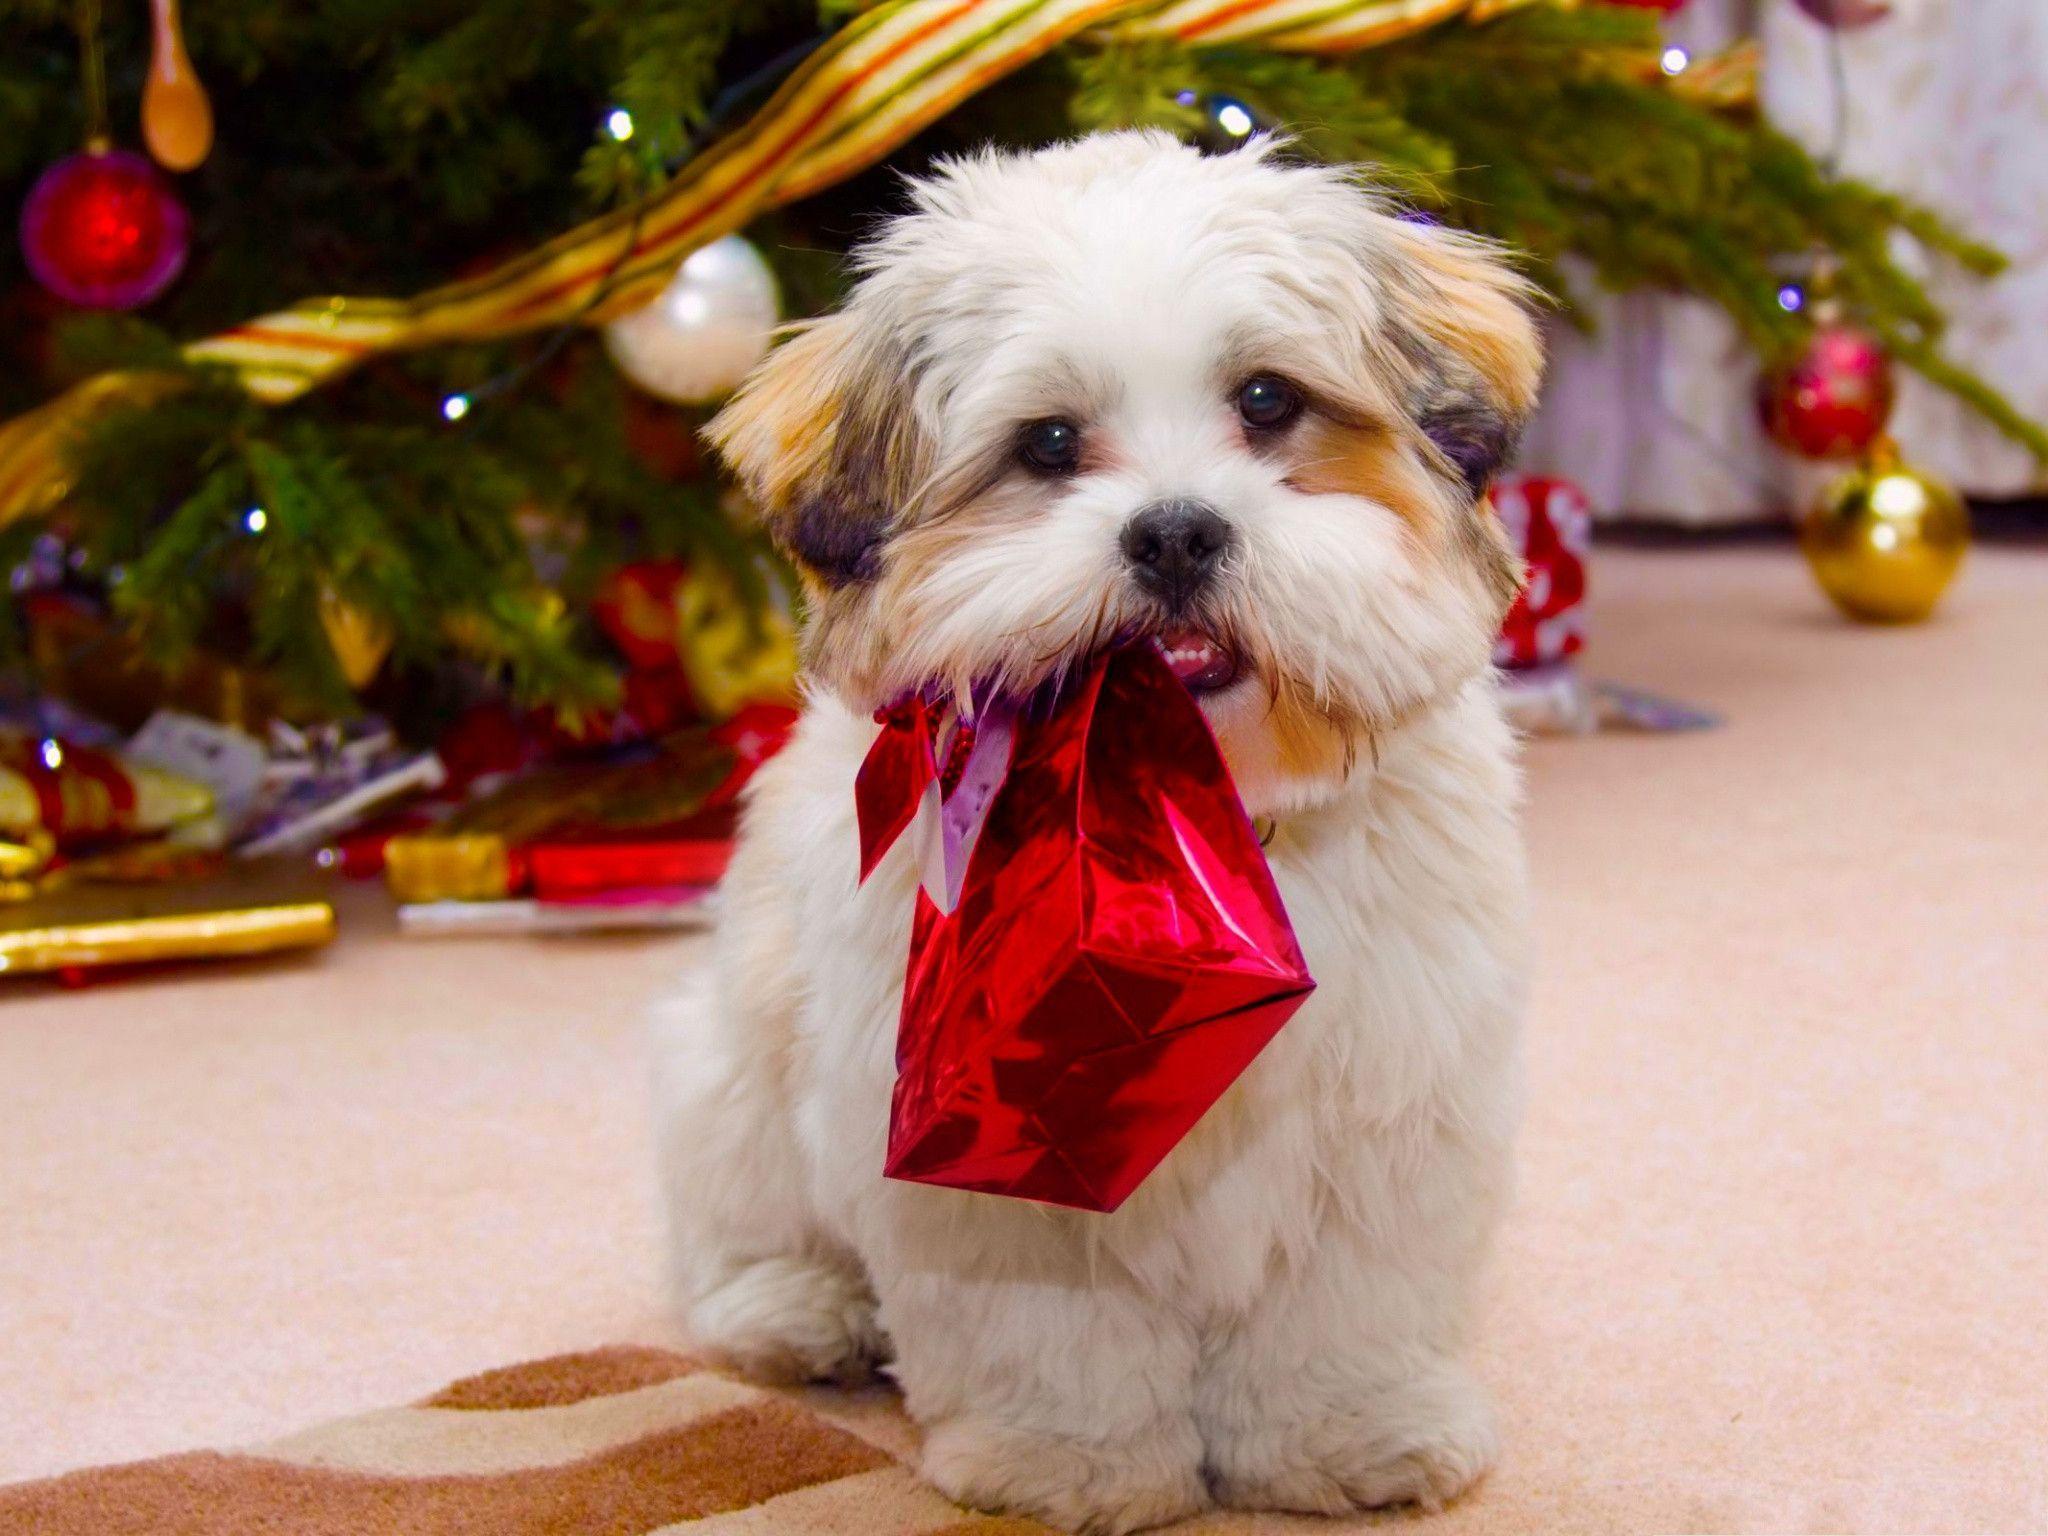 Xmas Stuff For > Christmas Puppy Wallpaper Background